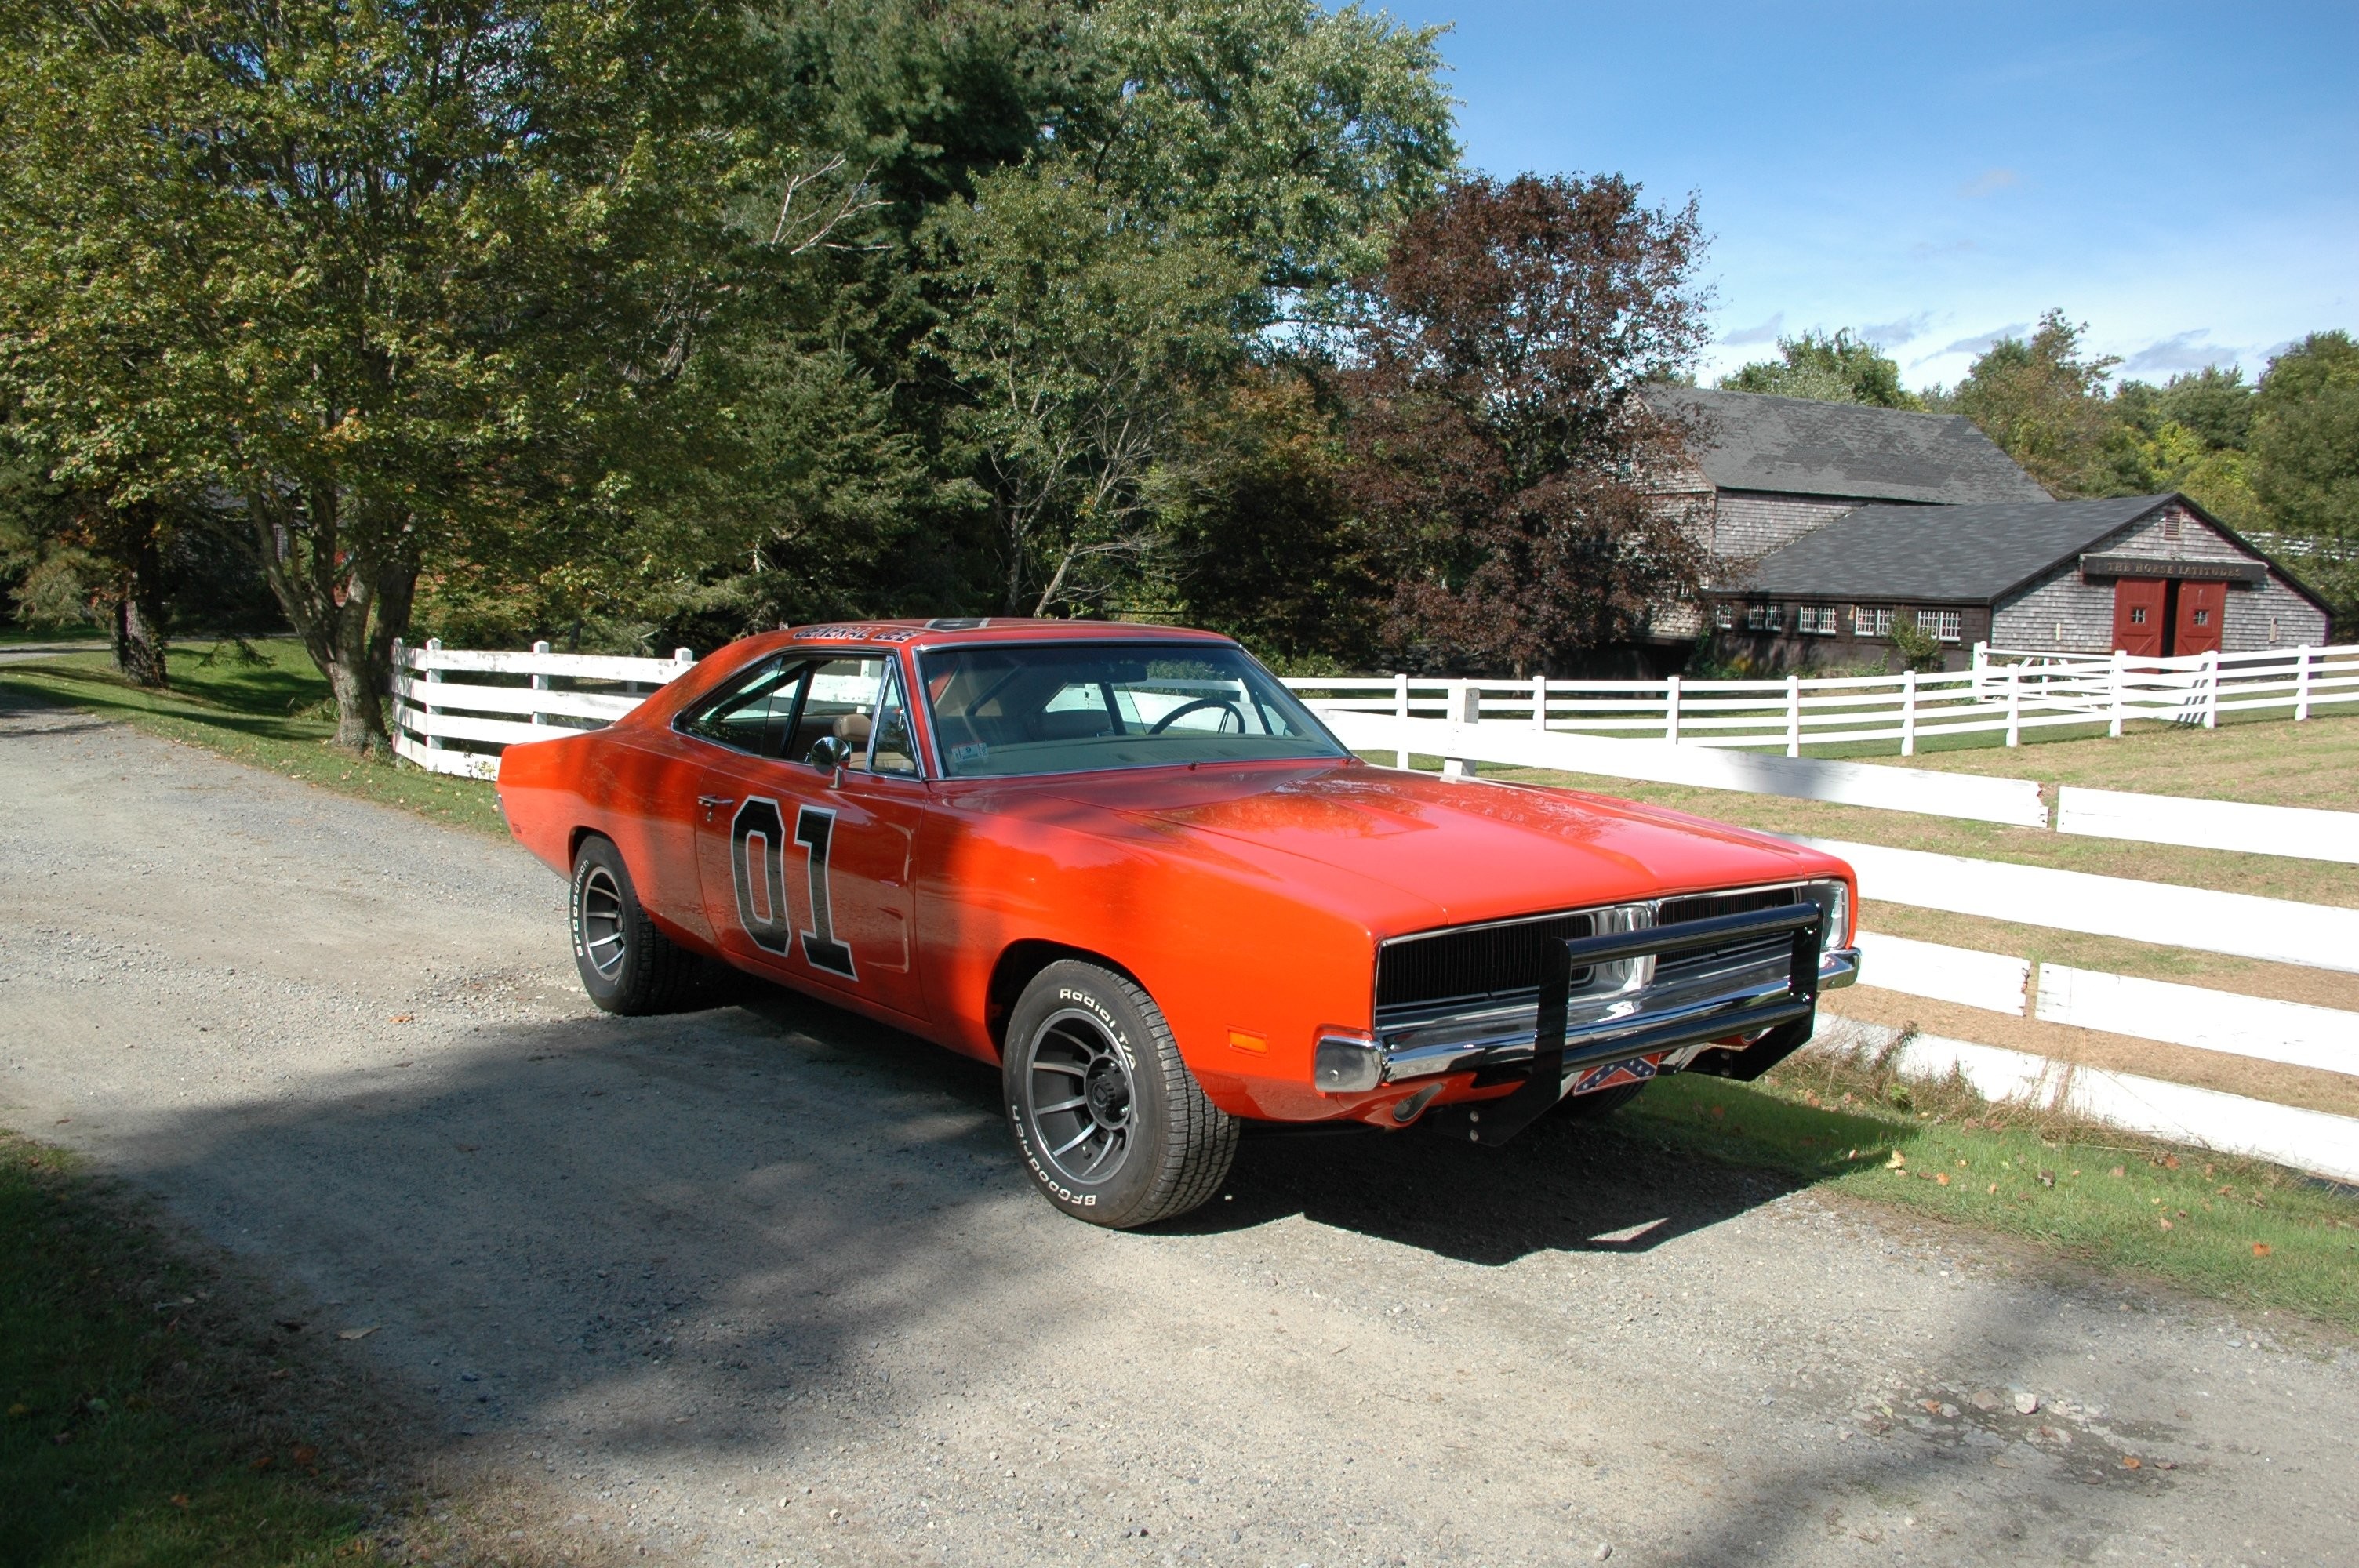 3008x2000 GENERAL LEE dukes hazzard dodge charger muscle hot rod rods television  series wallpaper |  | 289145 | WallpaperUP